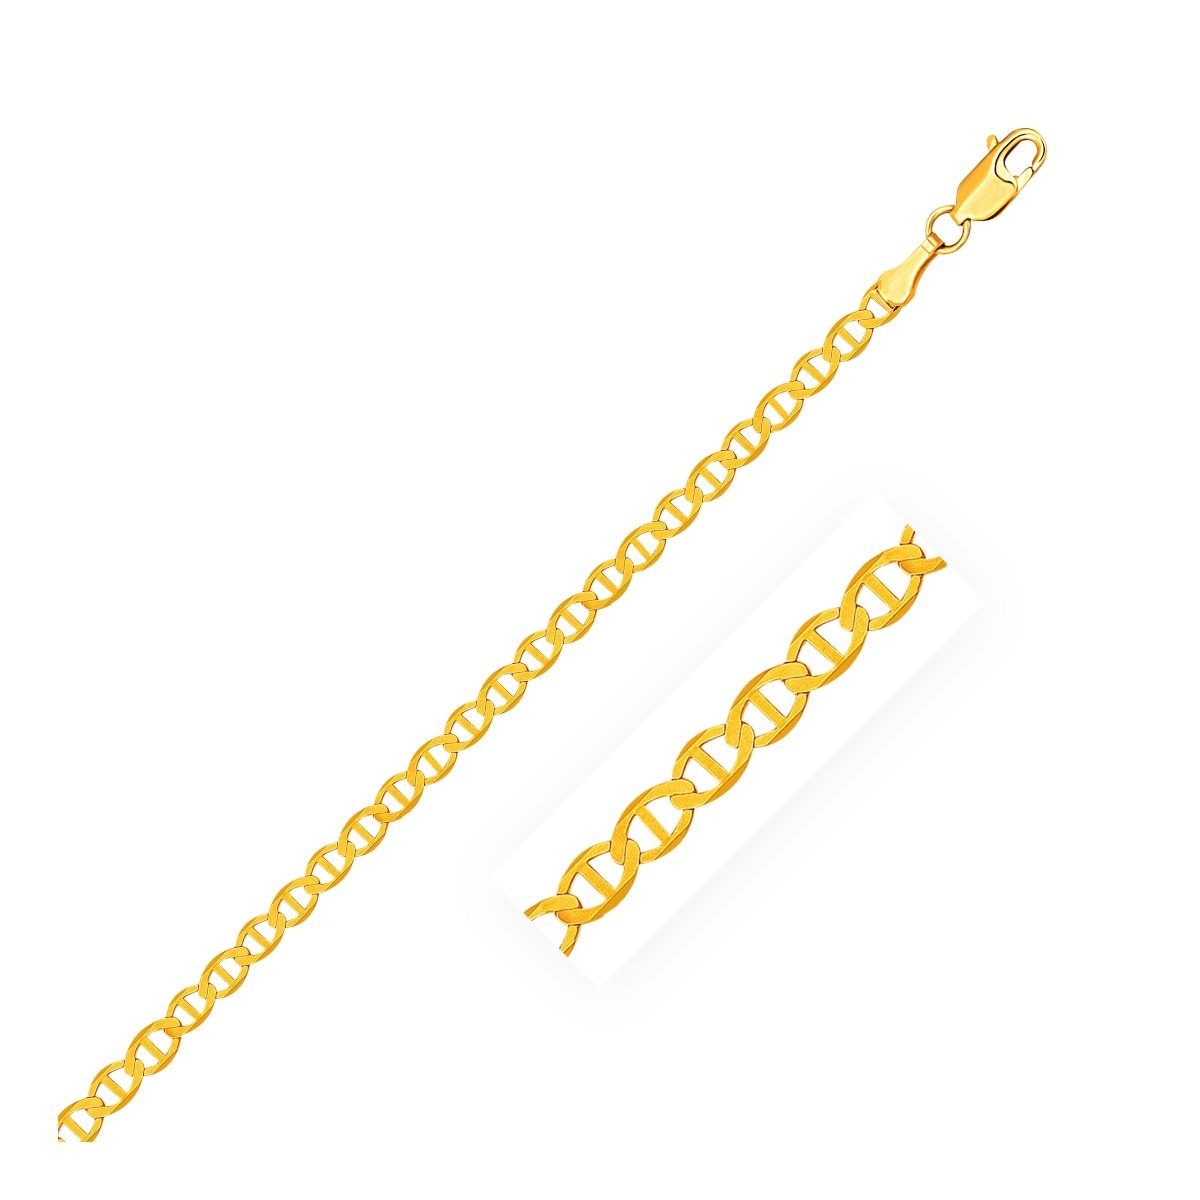 Picture of Iconic Jewels D104688-24 3.2 mm 10k Yellow Gold Mariner Link Chain - Size 24 in.